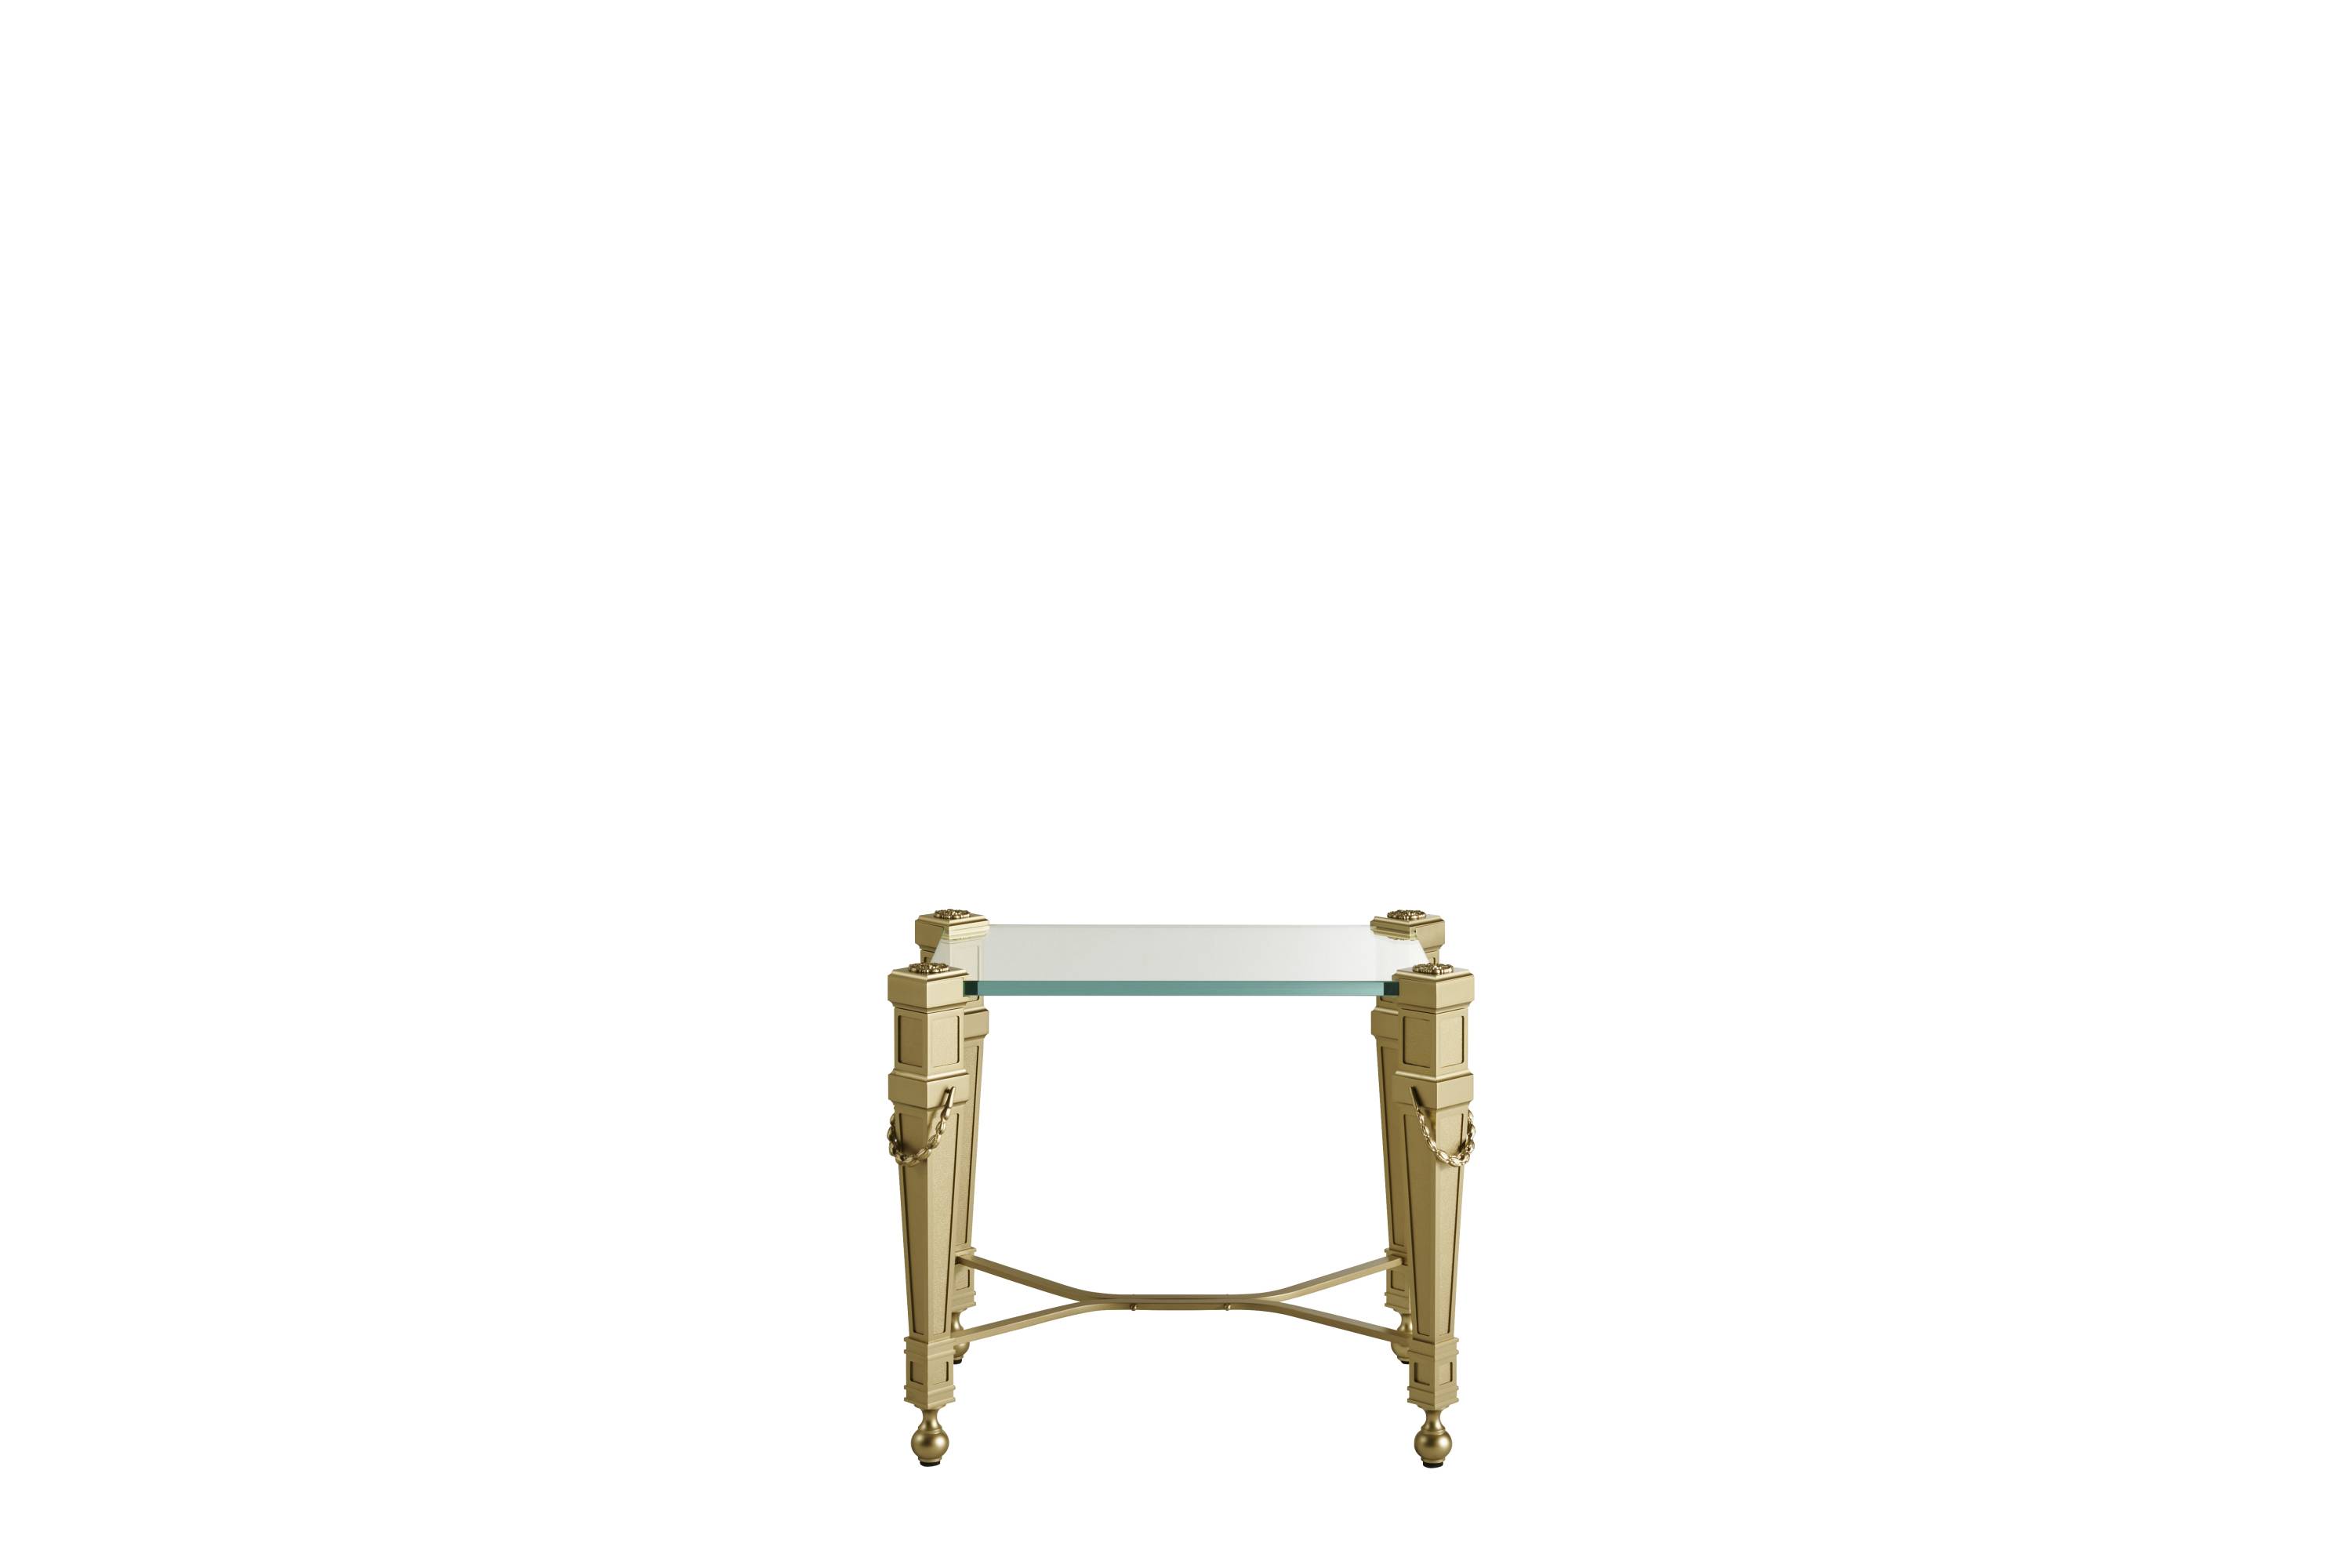 GIOVE low table - A luxury experience with the Héritage collection and its classic luxurious furniture